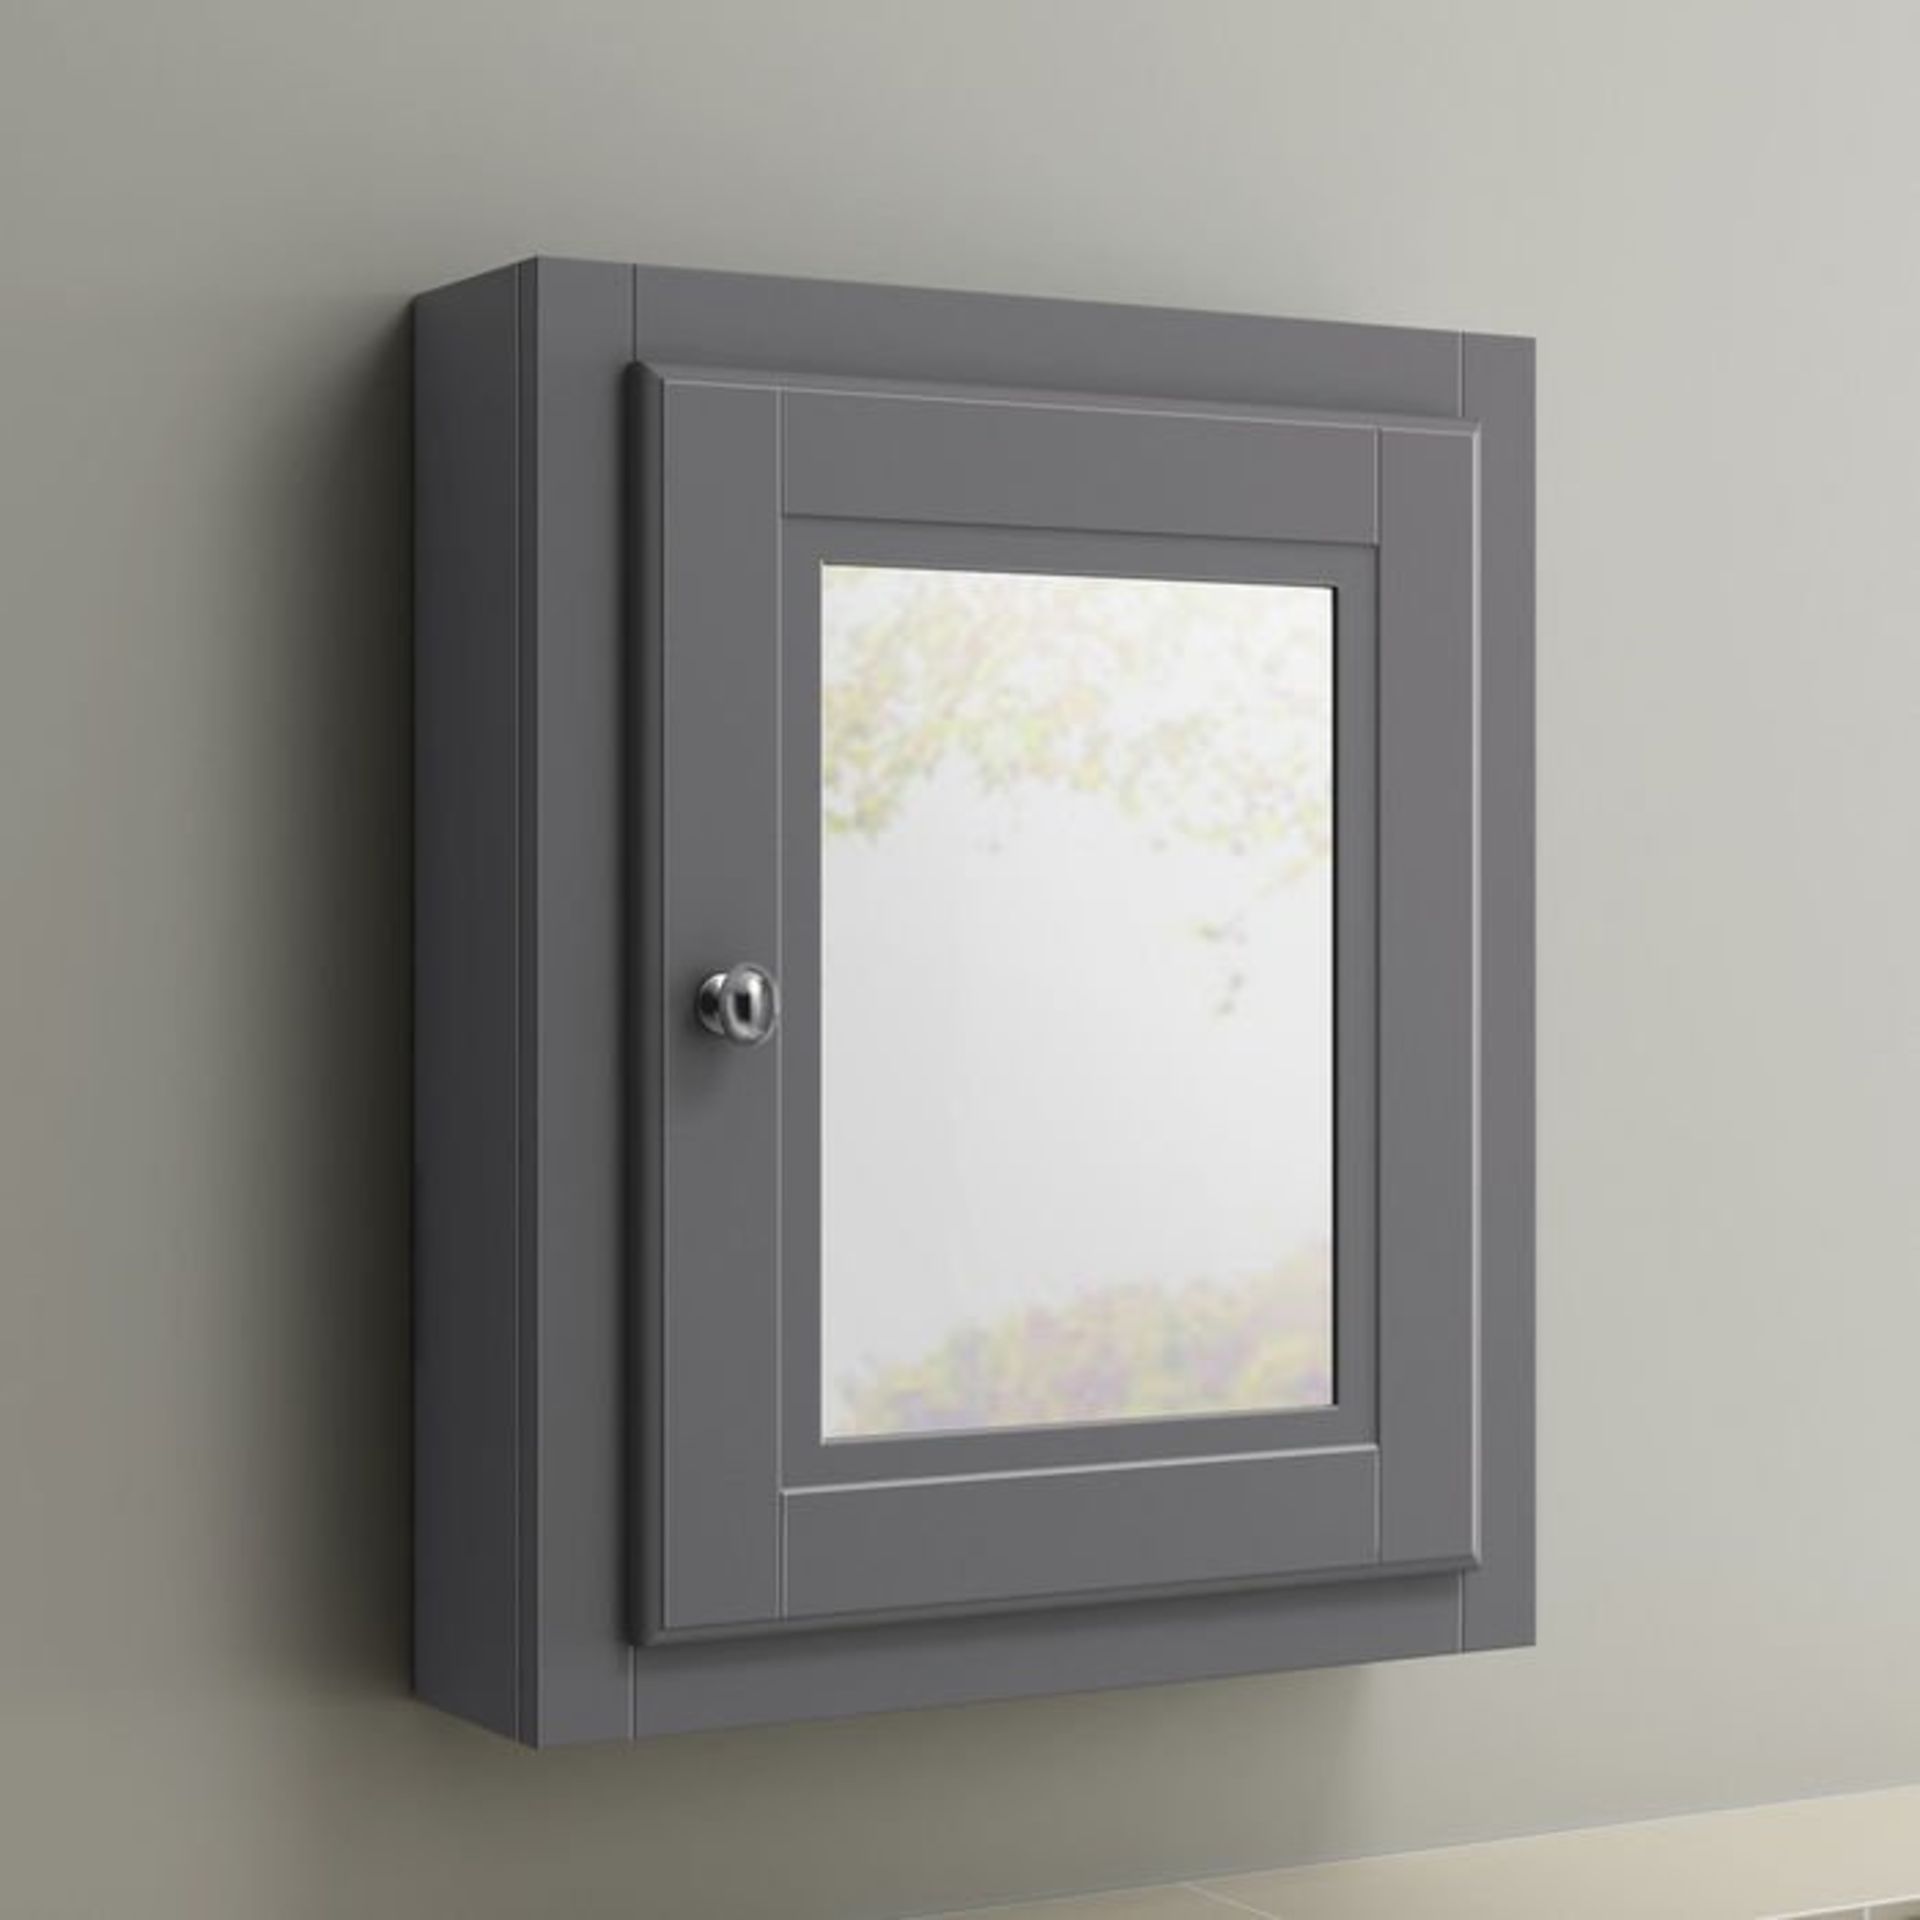 (G165) 500mm Cambridge Midnight Grey Single Door Mirror Cabinet. Traditional aesthetic offers a